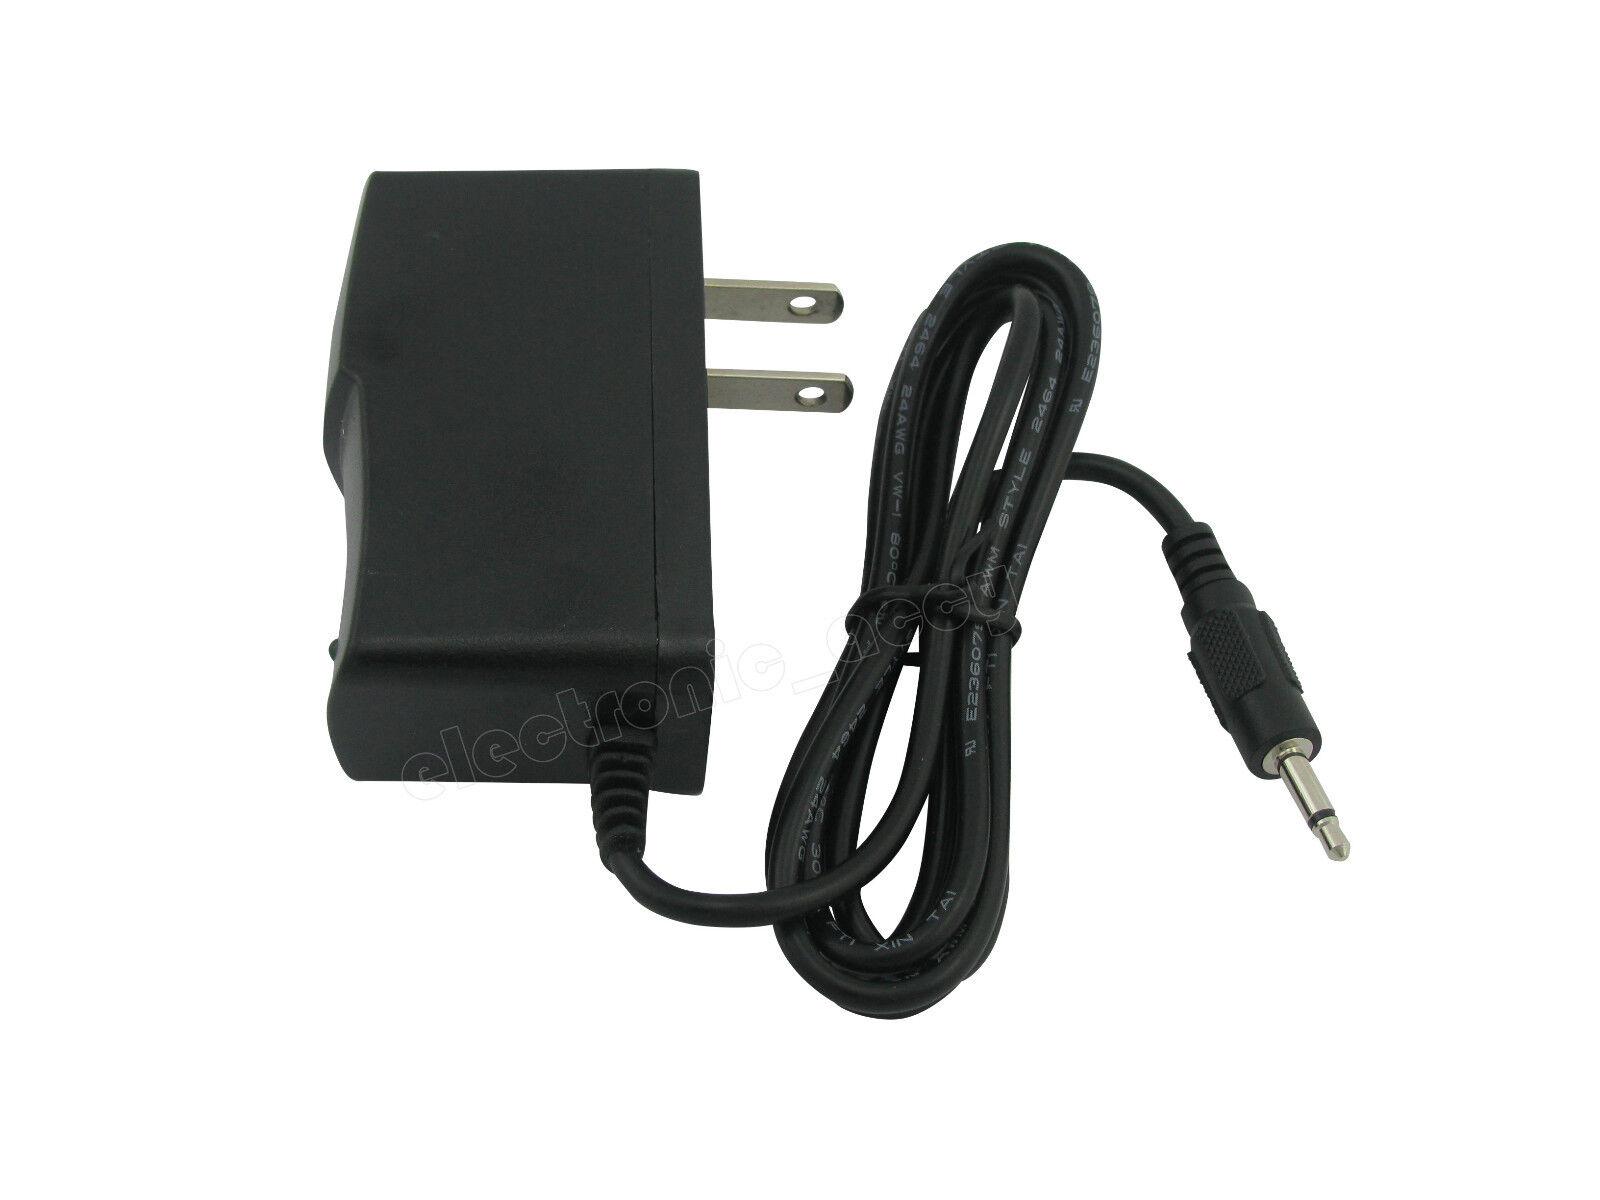 New AC Power Supply Adapter For ATARI 2600 System Console New AC Power Supply Adapter For ATARI 2600 System Console